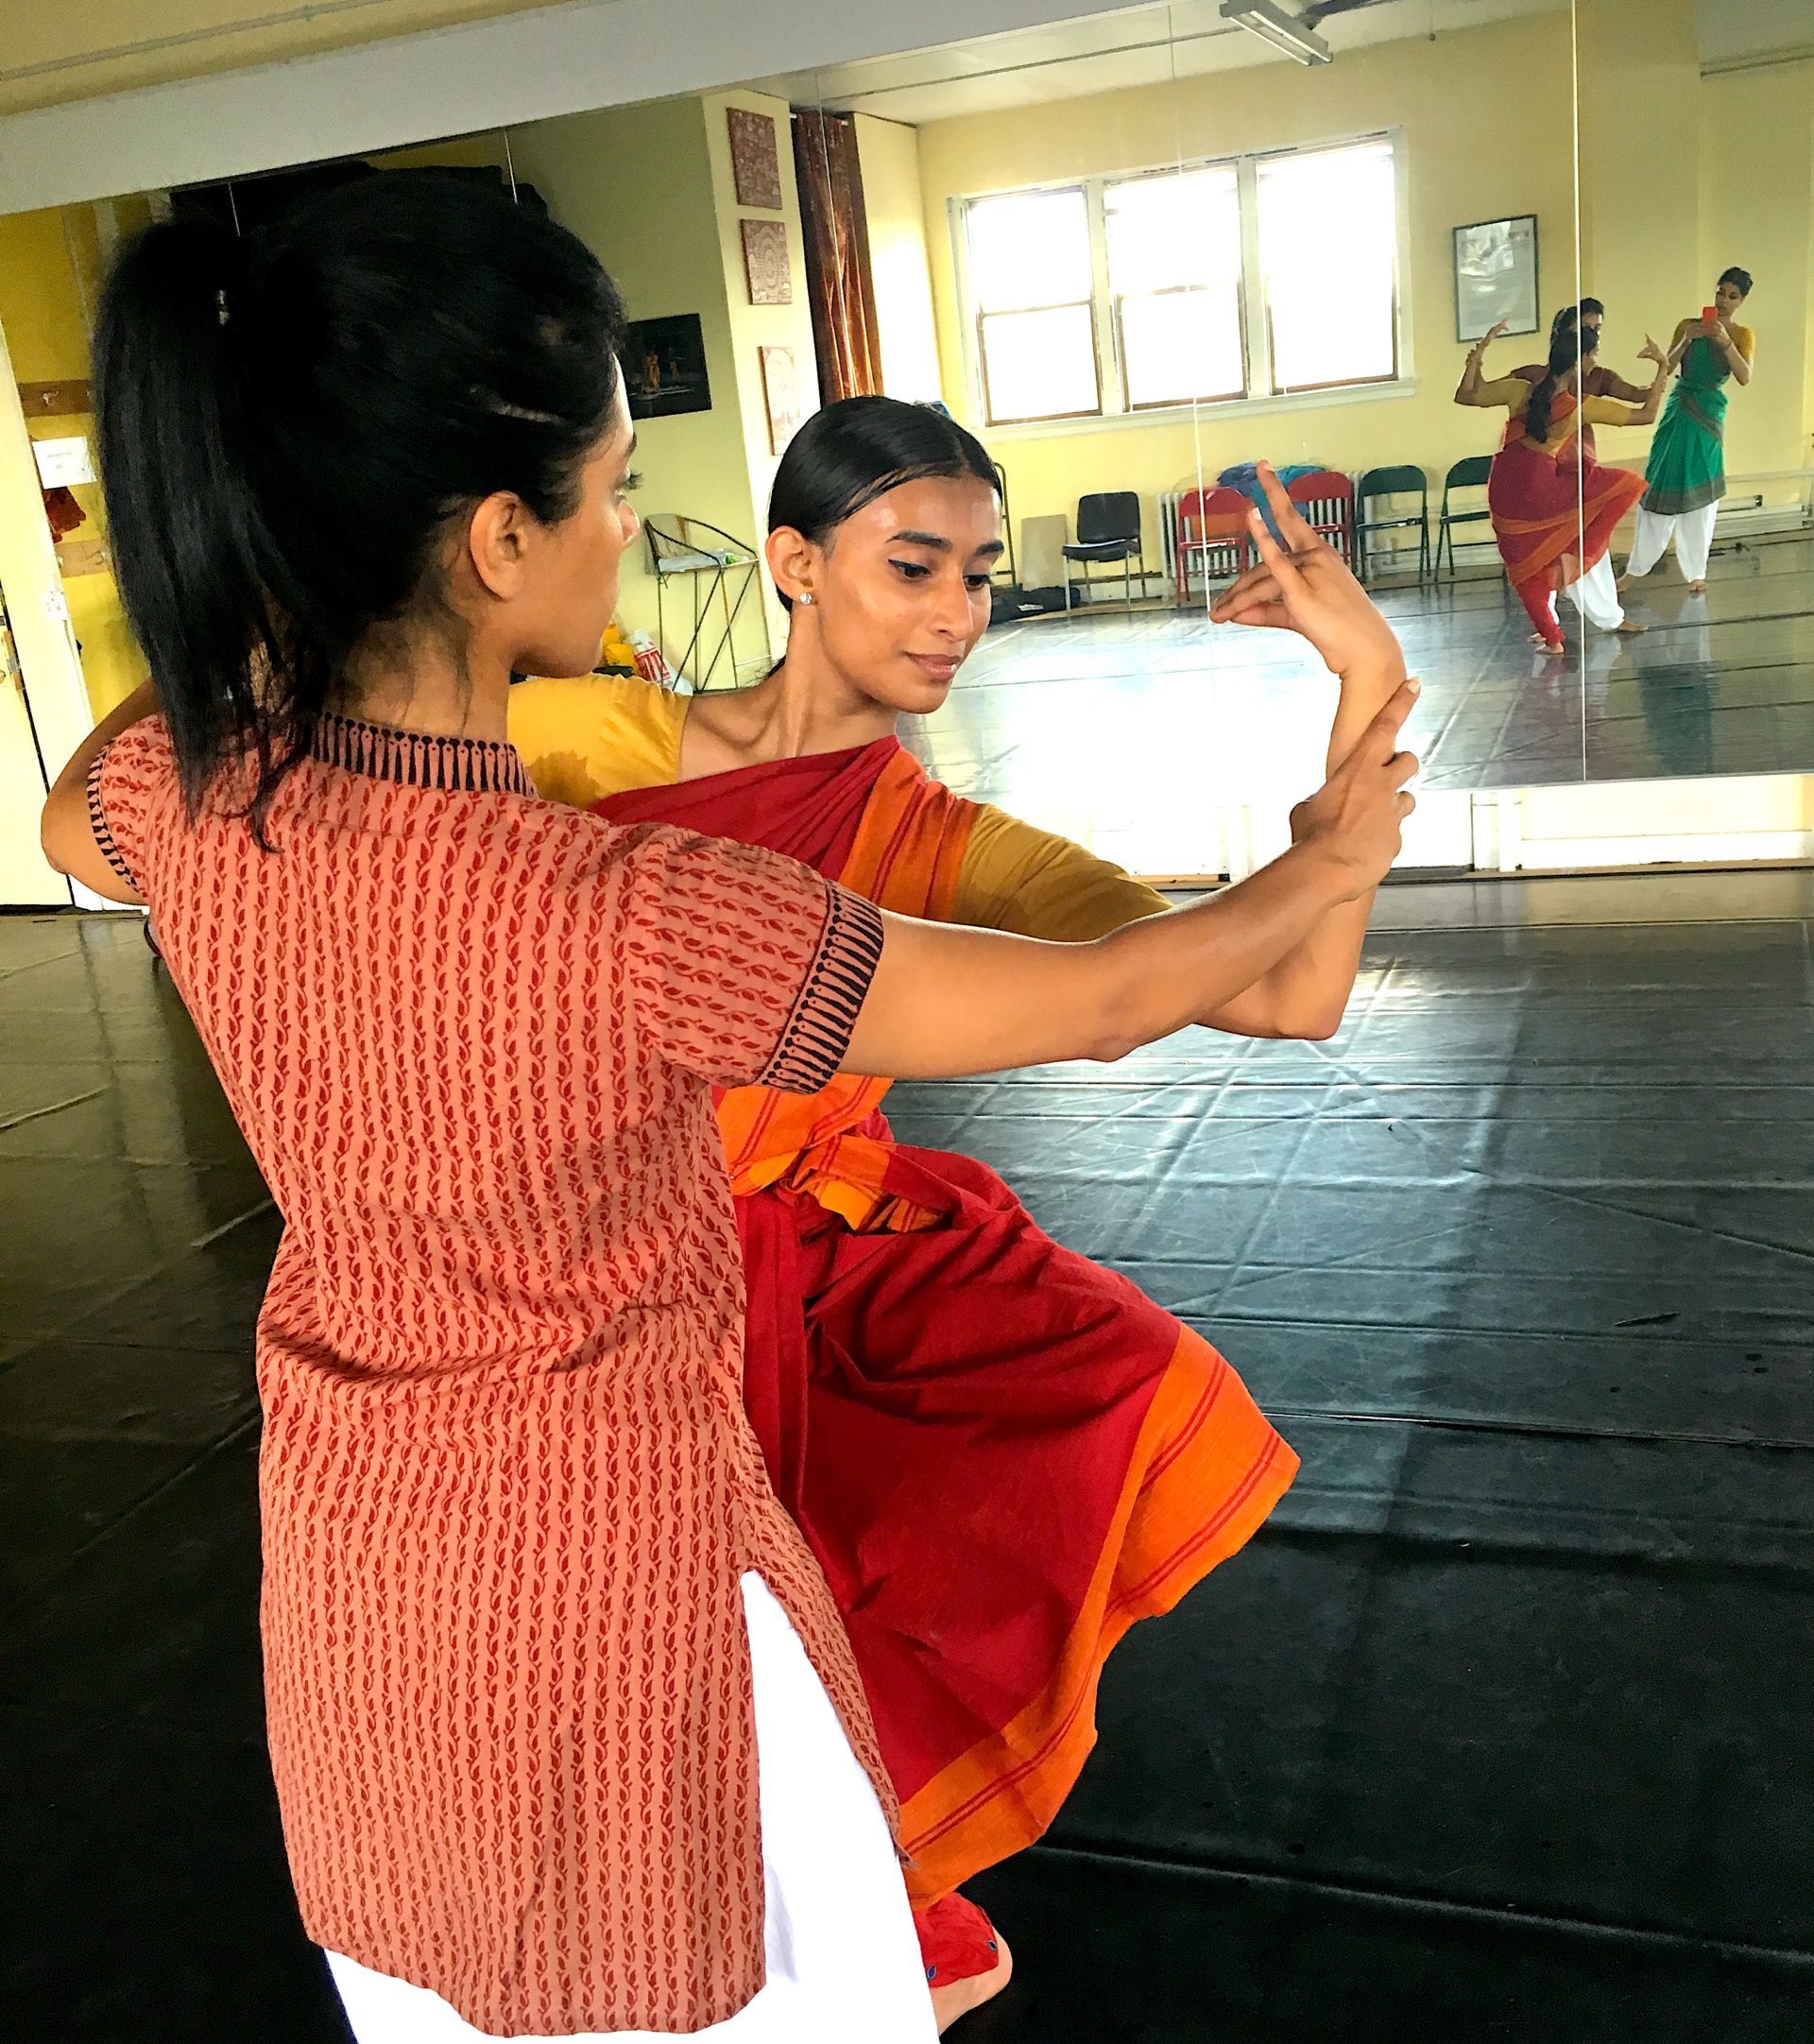 Ramaswamy corrects a students arm placement, adjusting her wrist.